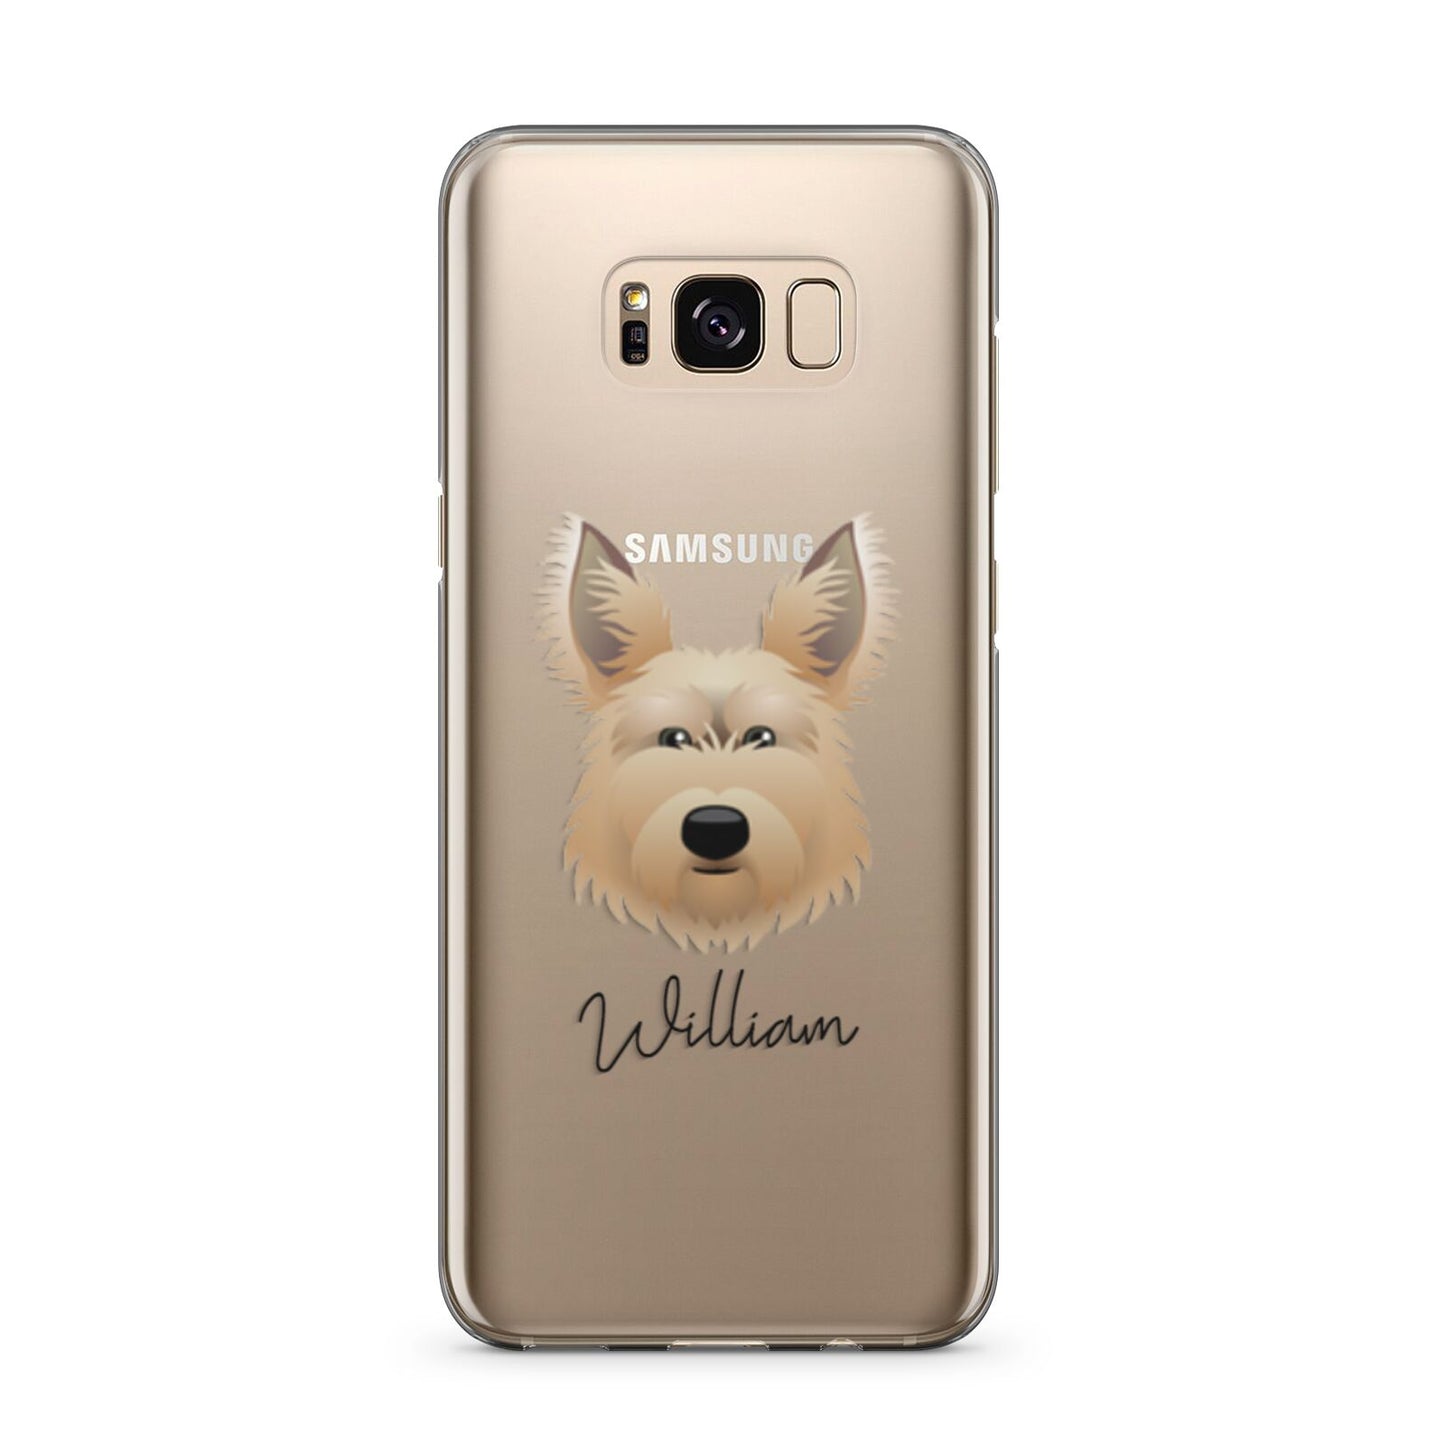 Picardy Sheepdog Personalised Samsung Galaxy S8 Plus Case